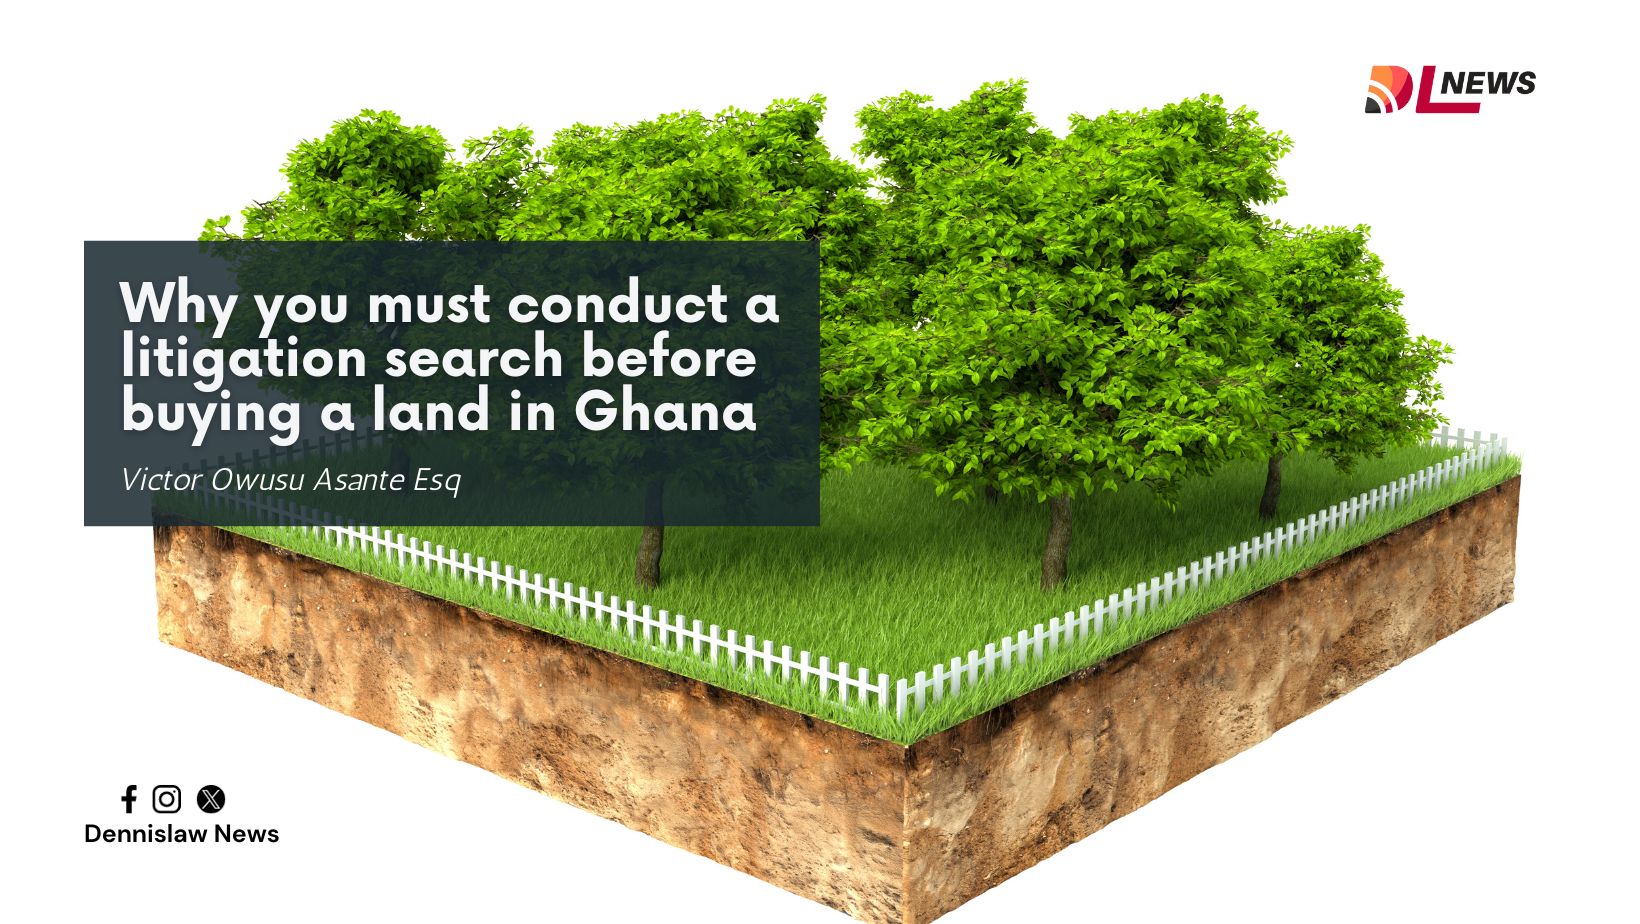 Why you must conduct a litigation search before buying a land in Ghana